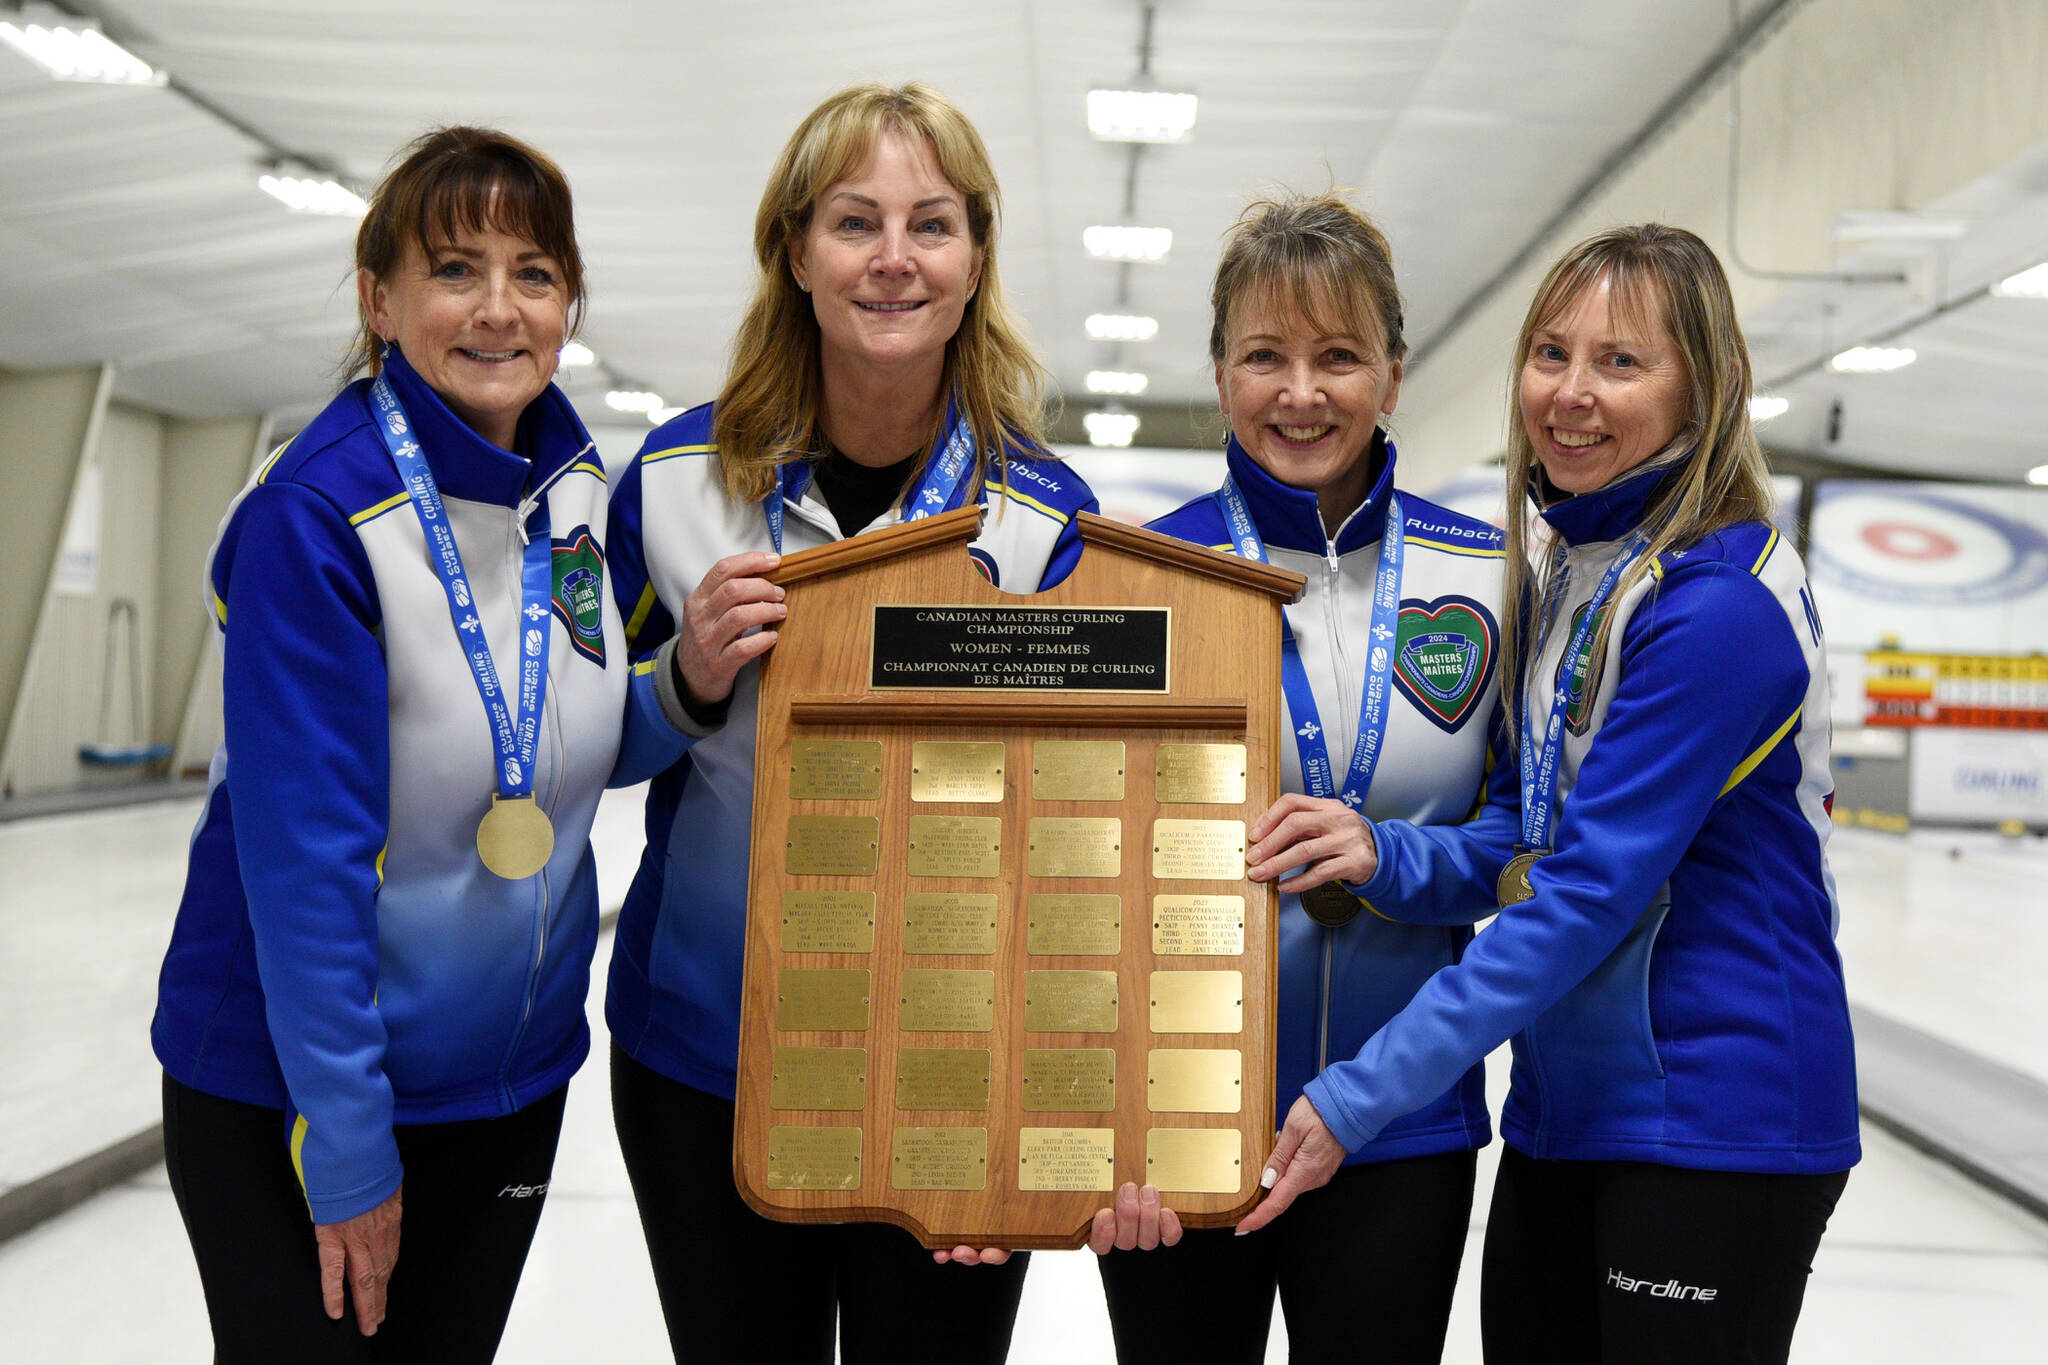 Cindy Curtain, left, Penny Shantz, Danielle Shaughnessy and Donna Mychaluk show the trophy thei won in Canadian women’s masters curling. (Contributed)